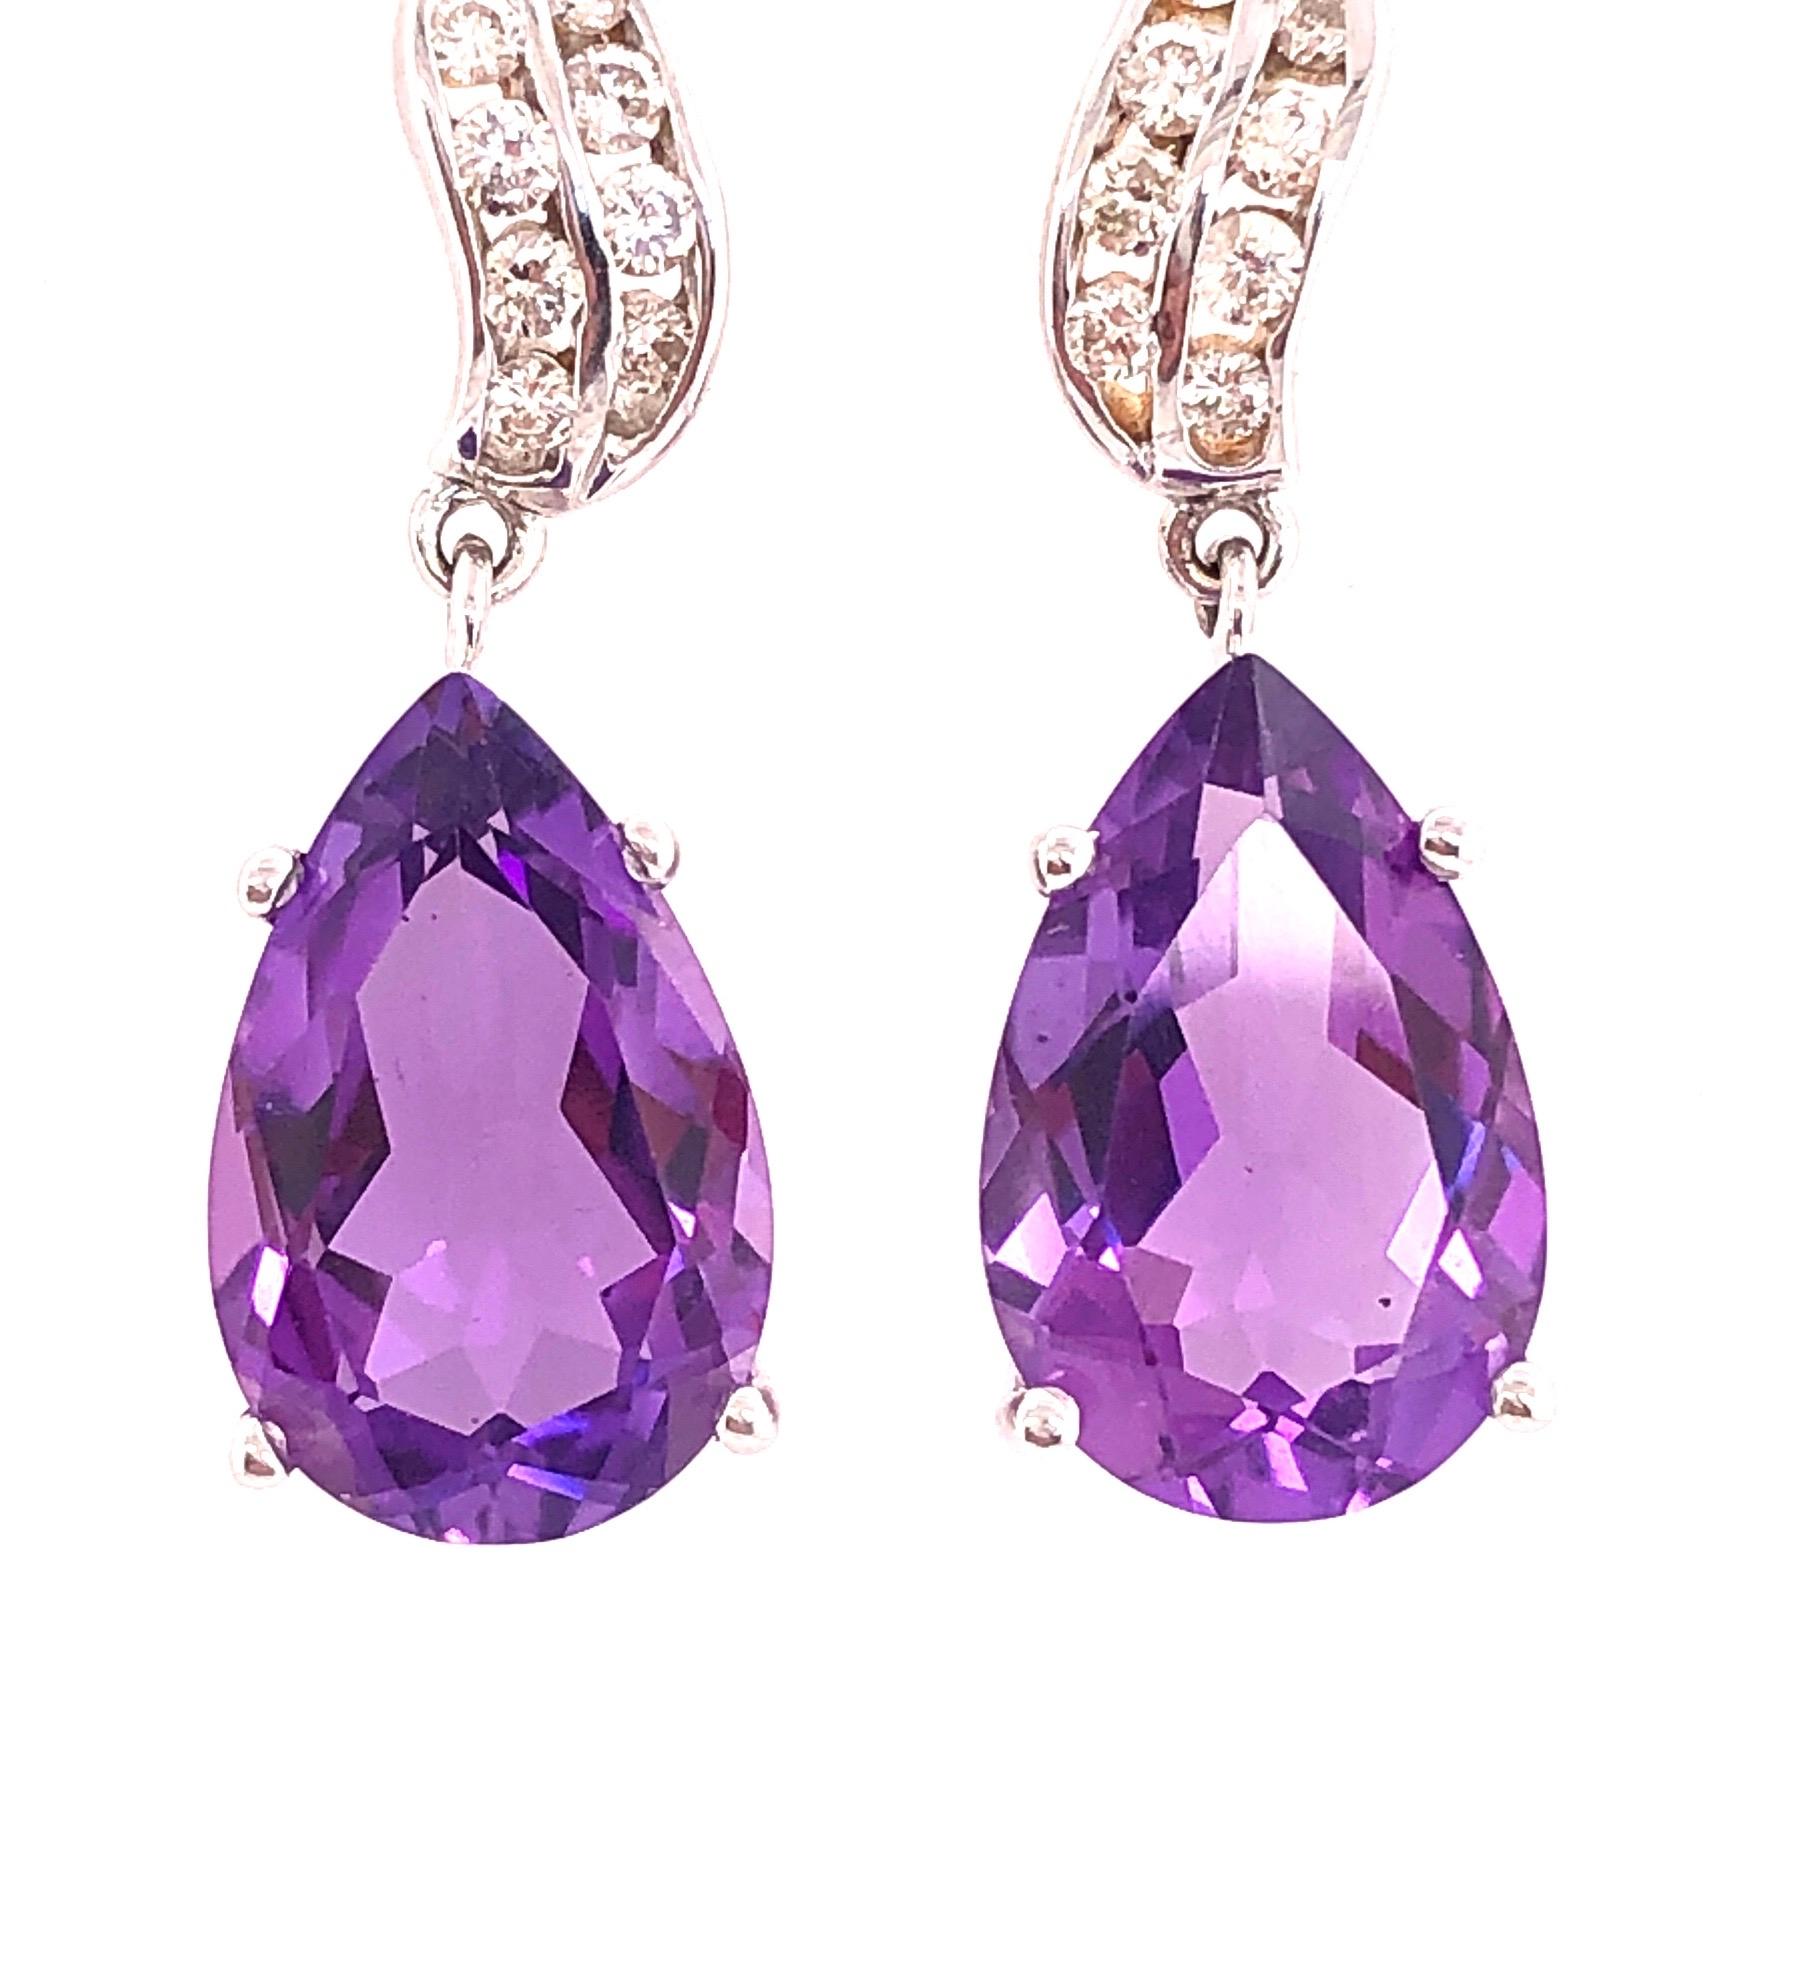 Women's or Men's 14 Karat Gold Earrings with Diamonds and Amethysts 0.50 Total Diamond Weight For Sale